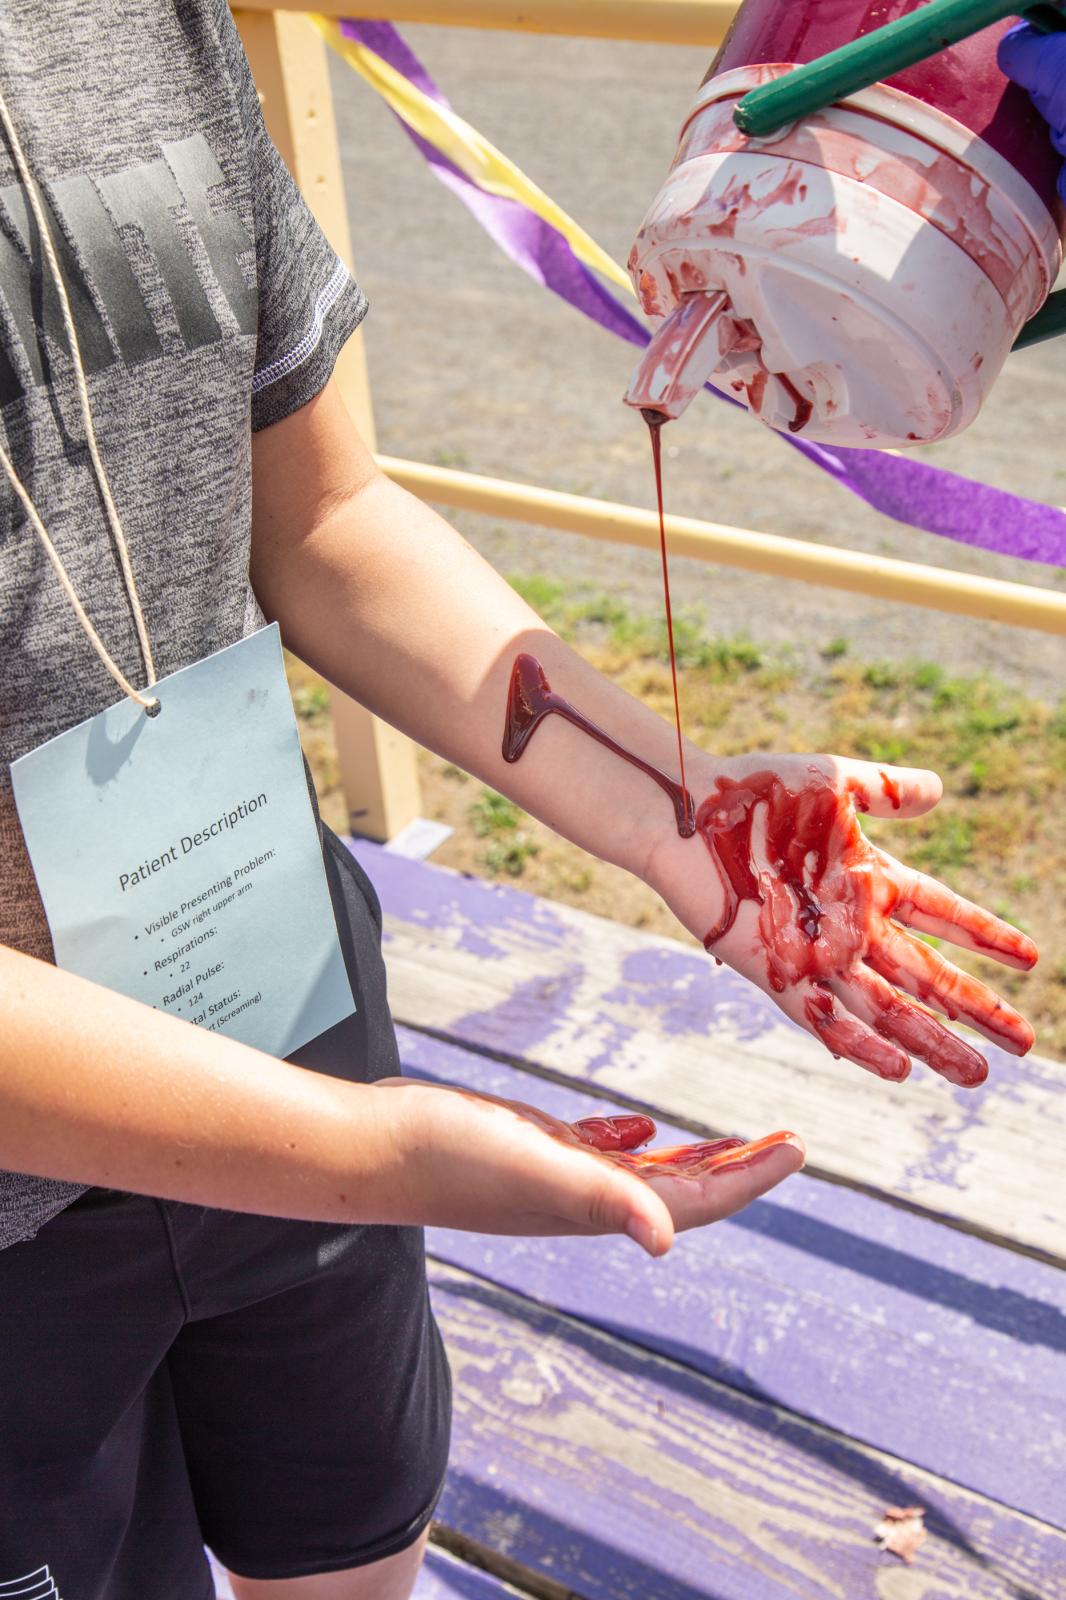 HELL DRILL * Warning: Sensitive Content  - Fake blood is applied to "victims" creating...